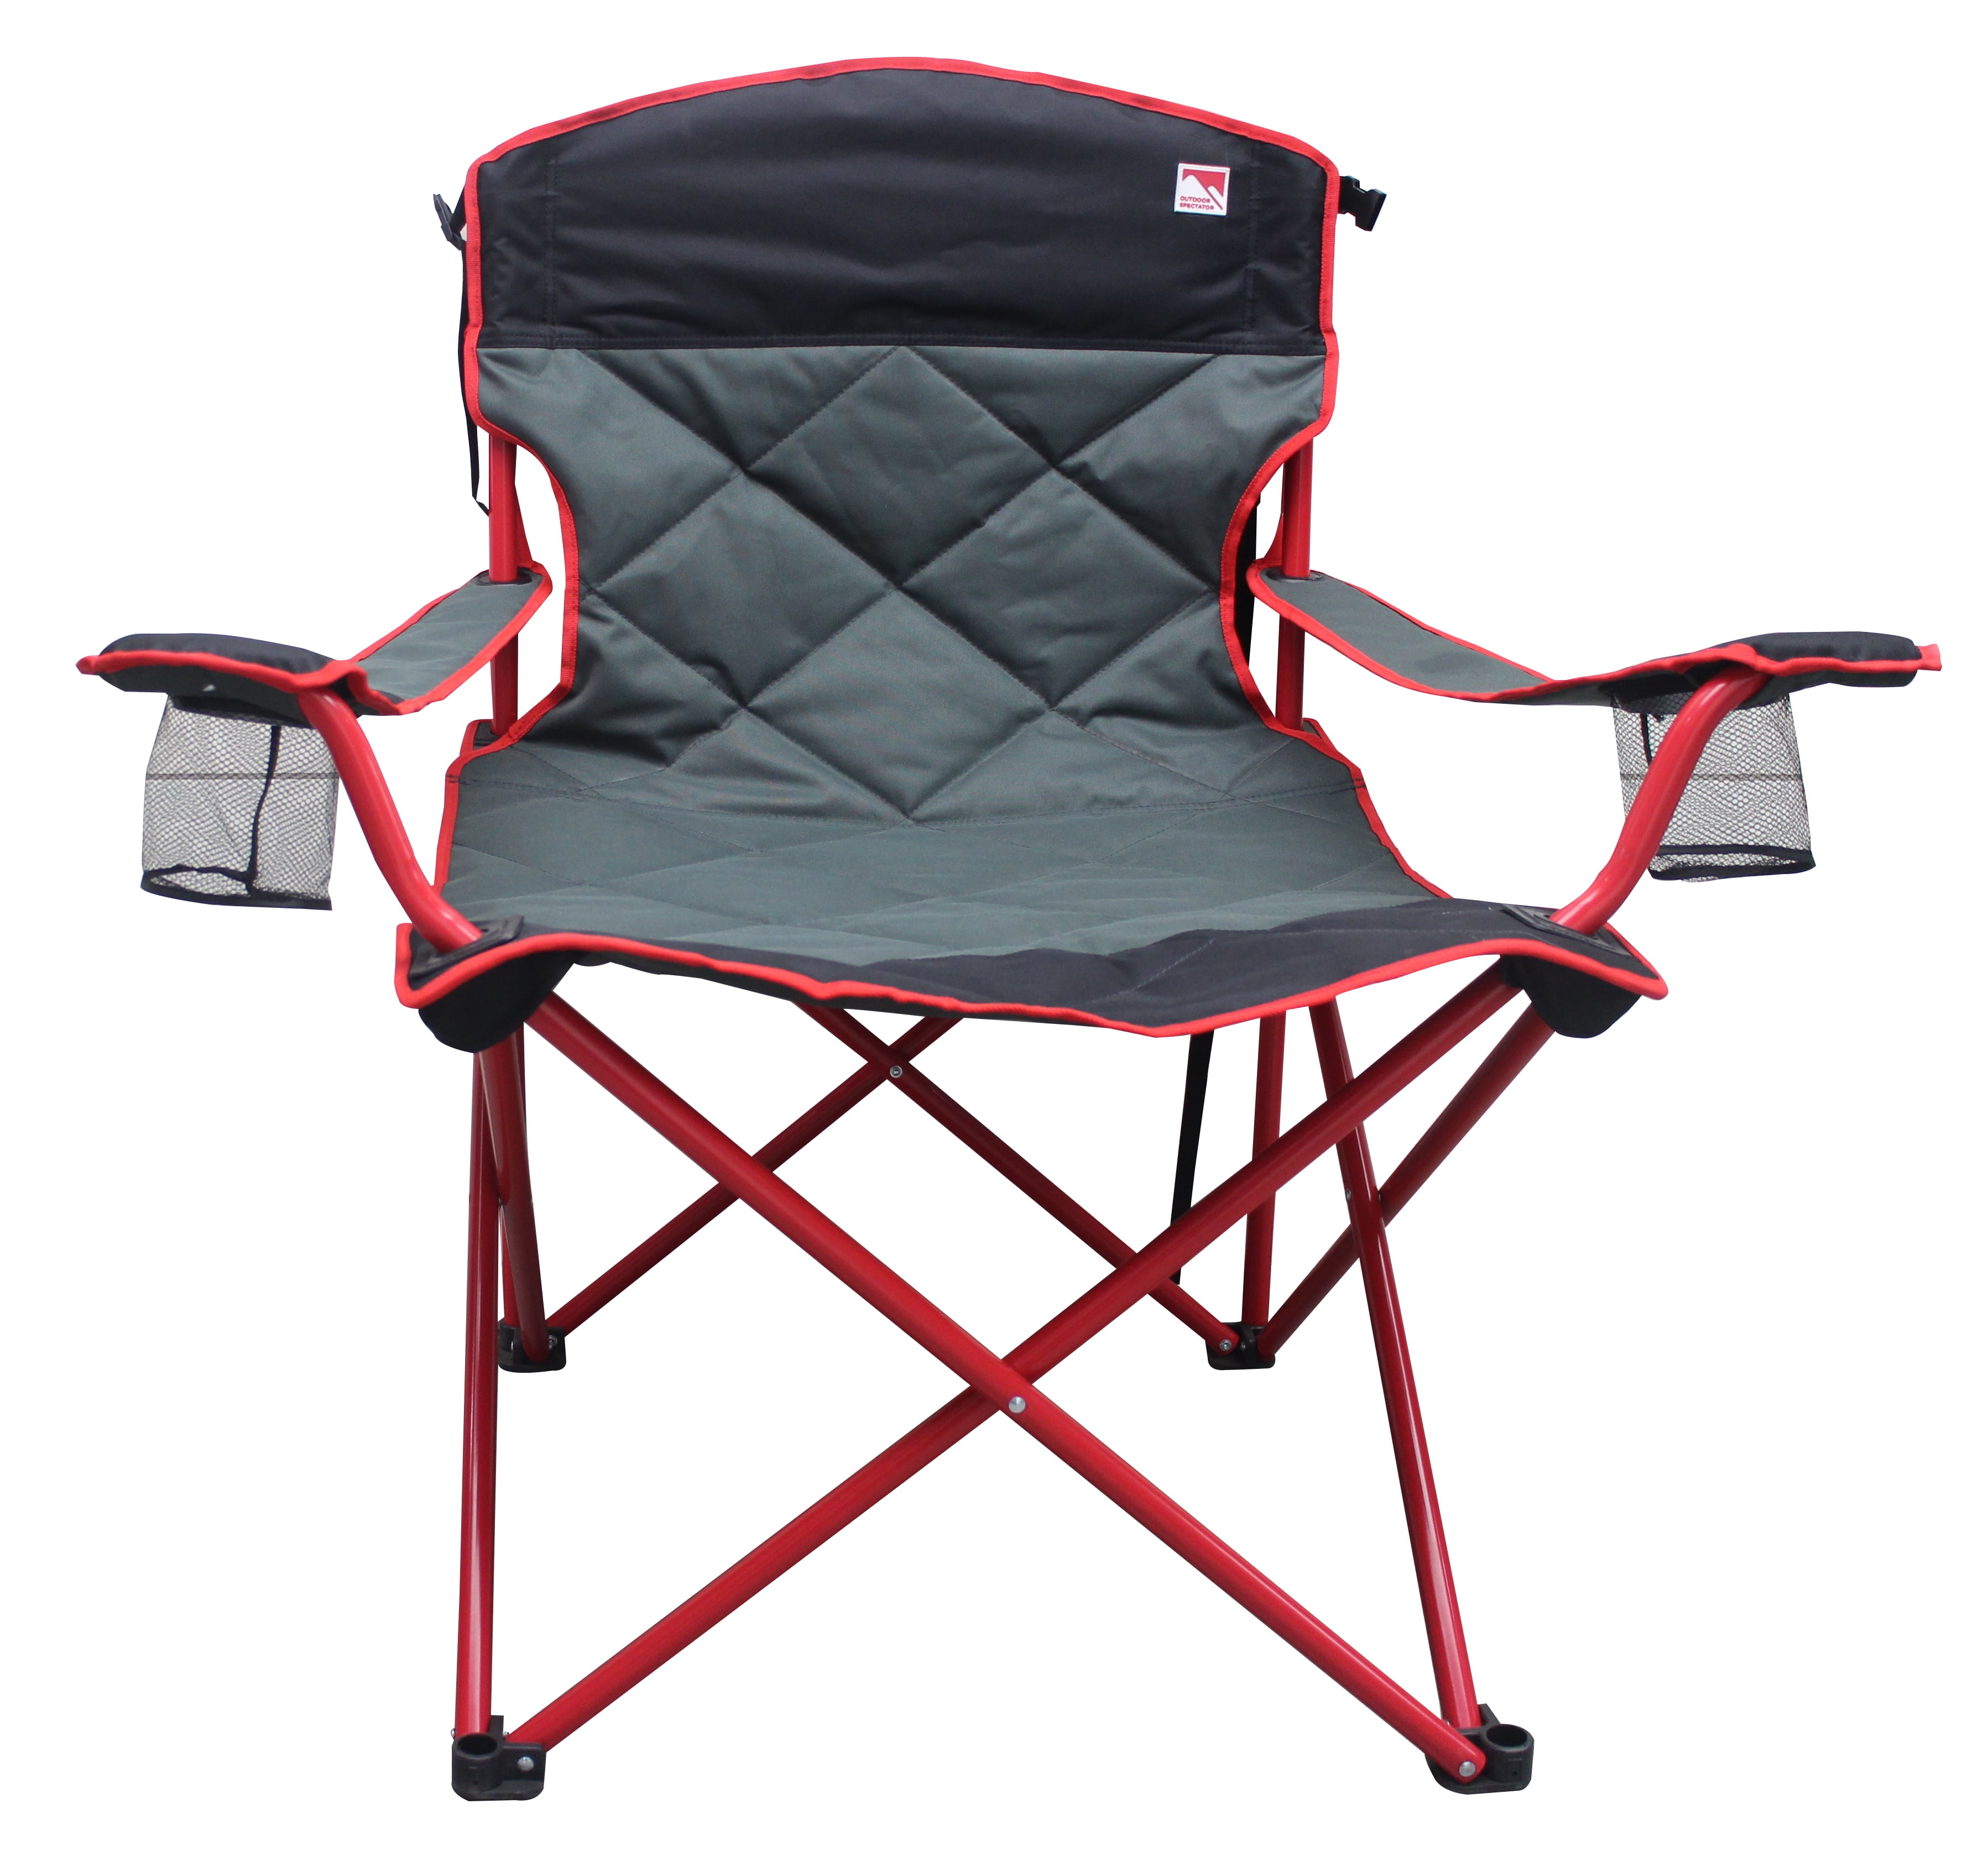 Ozark Trail Two Person Conversation Outdoor Camping Chair,Love Seat 